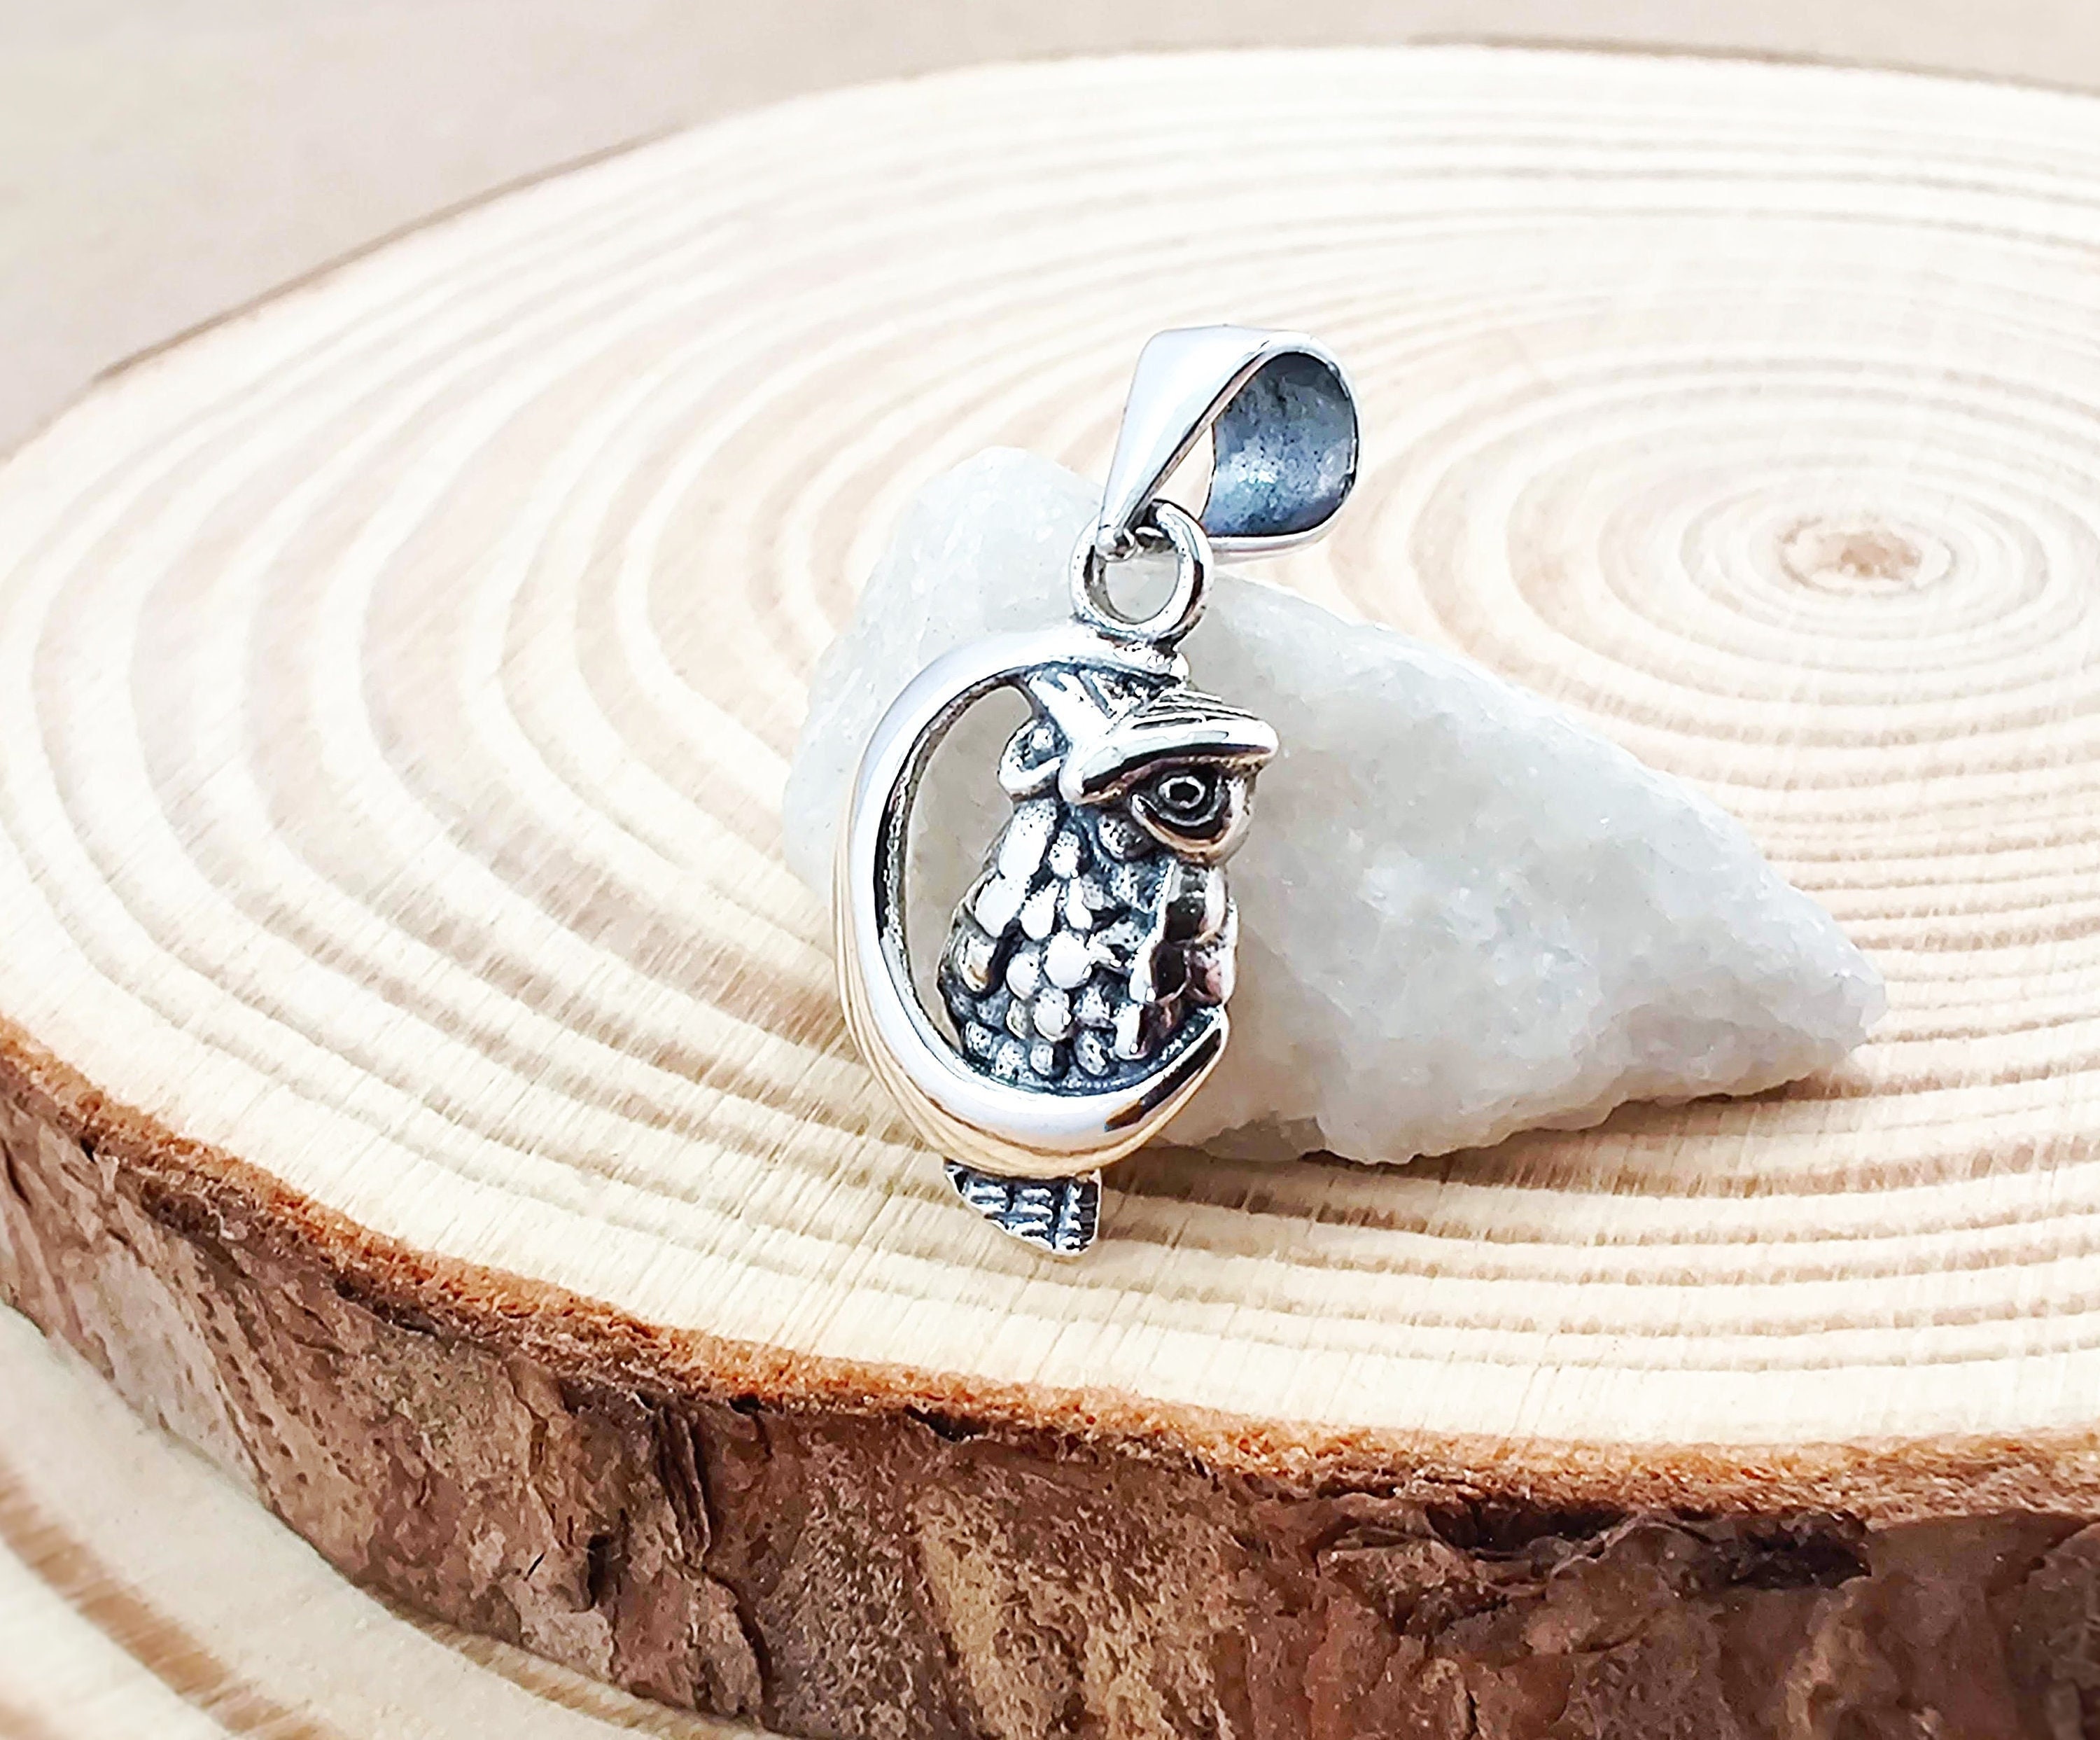 Tiny Cute Moon & Owl Silver Pendant Necklace, Bird 925 Sterling Silver Jewelry, Quirky Animal Si